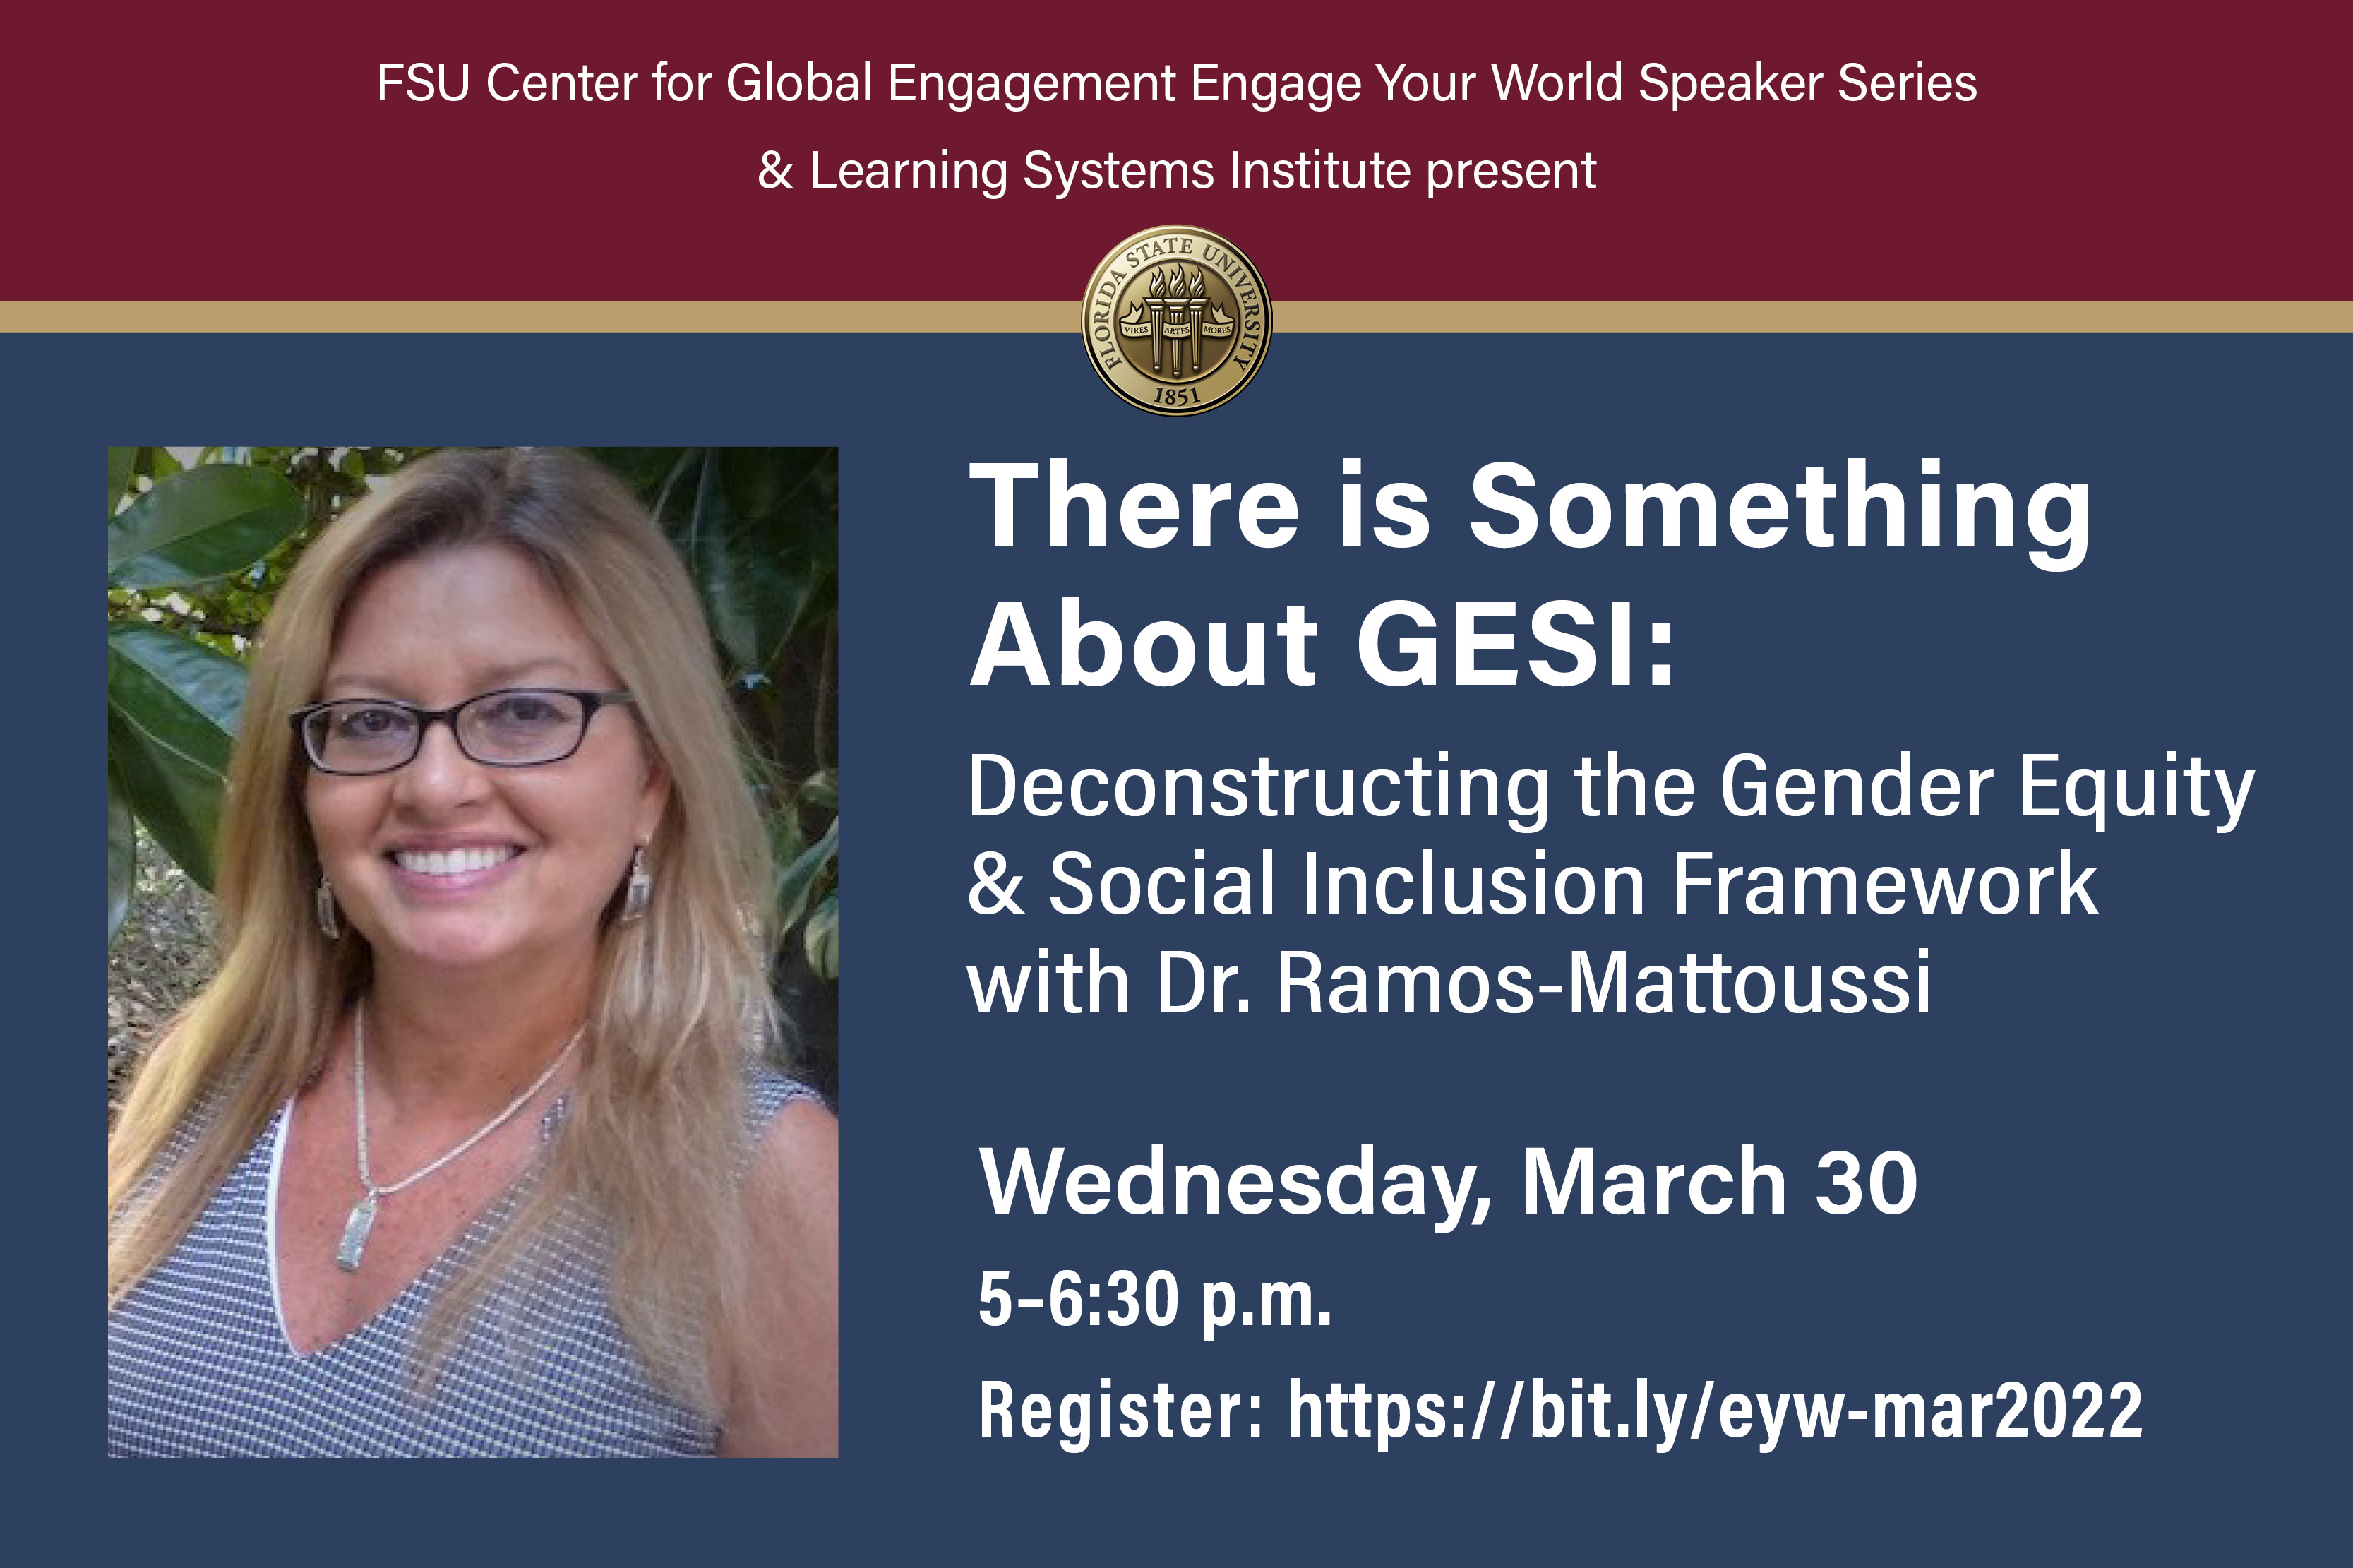 Engage Your World Speaker Series with Dr. Ramos-Mattoussi